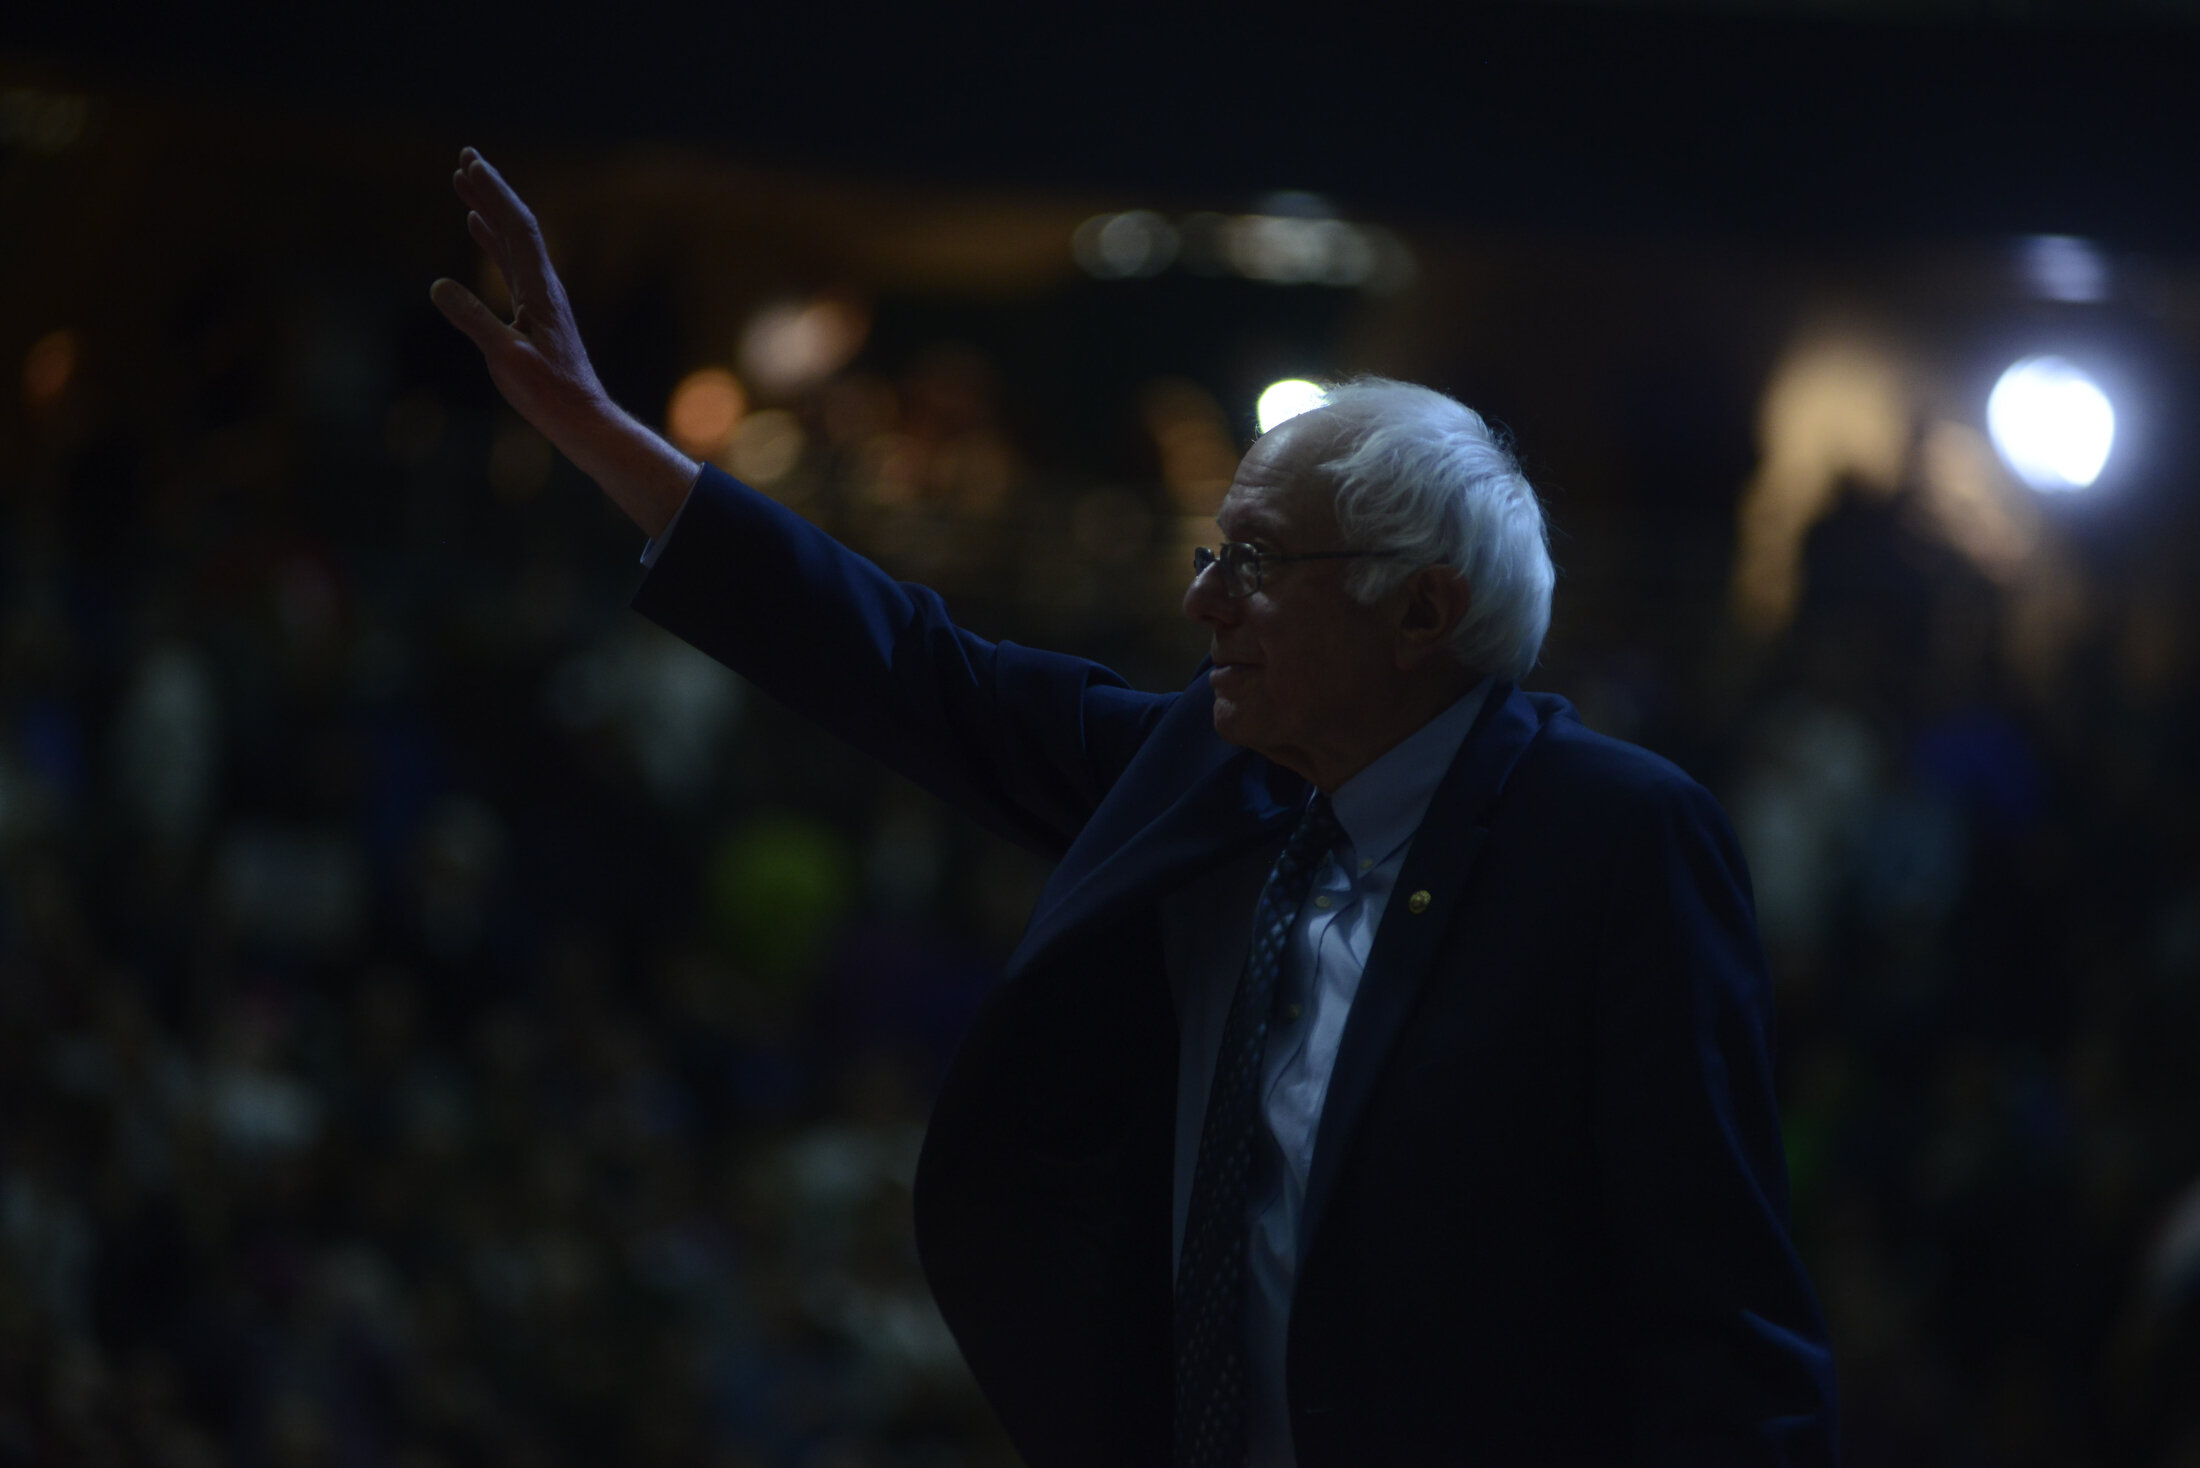  Bernie Sanders waves to the crowd during a presidential campaign visit to Michigan State University on March 2, 2016 in East Lansing, Michigan. 